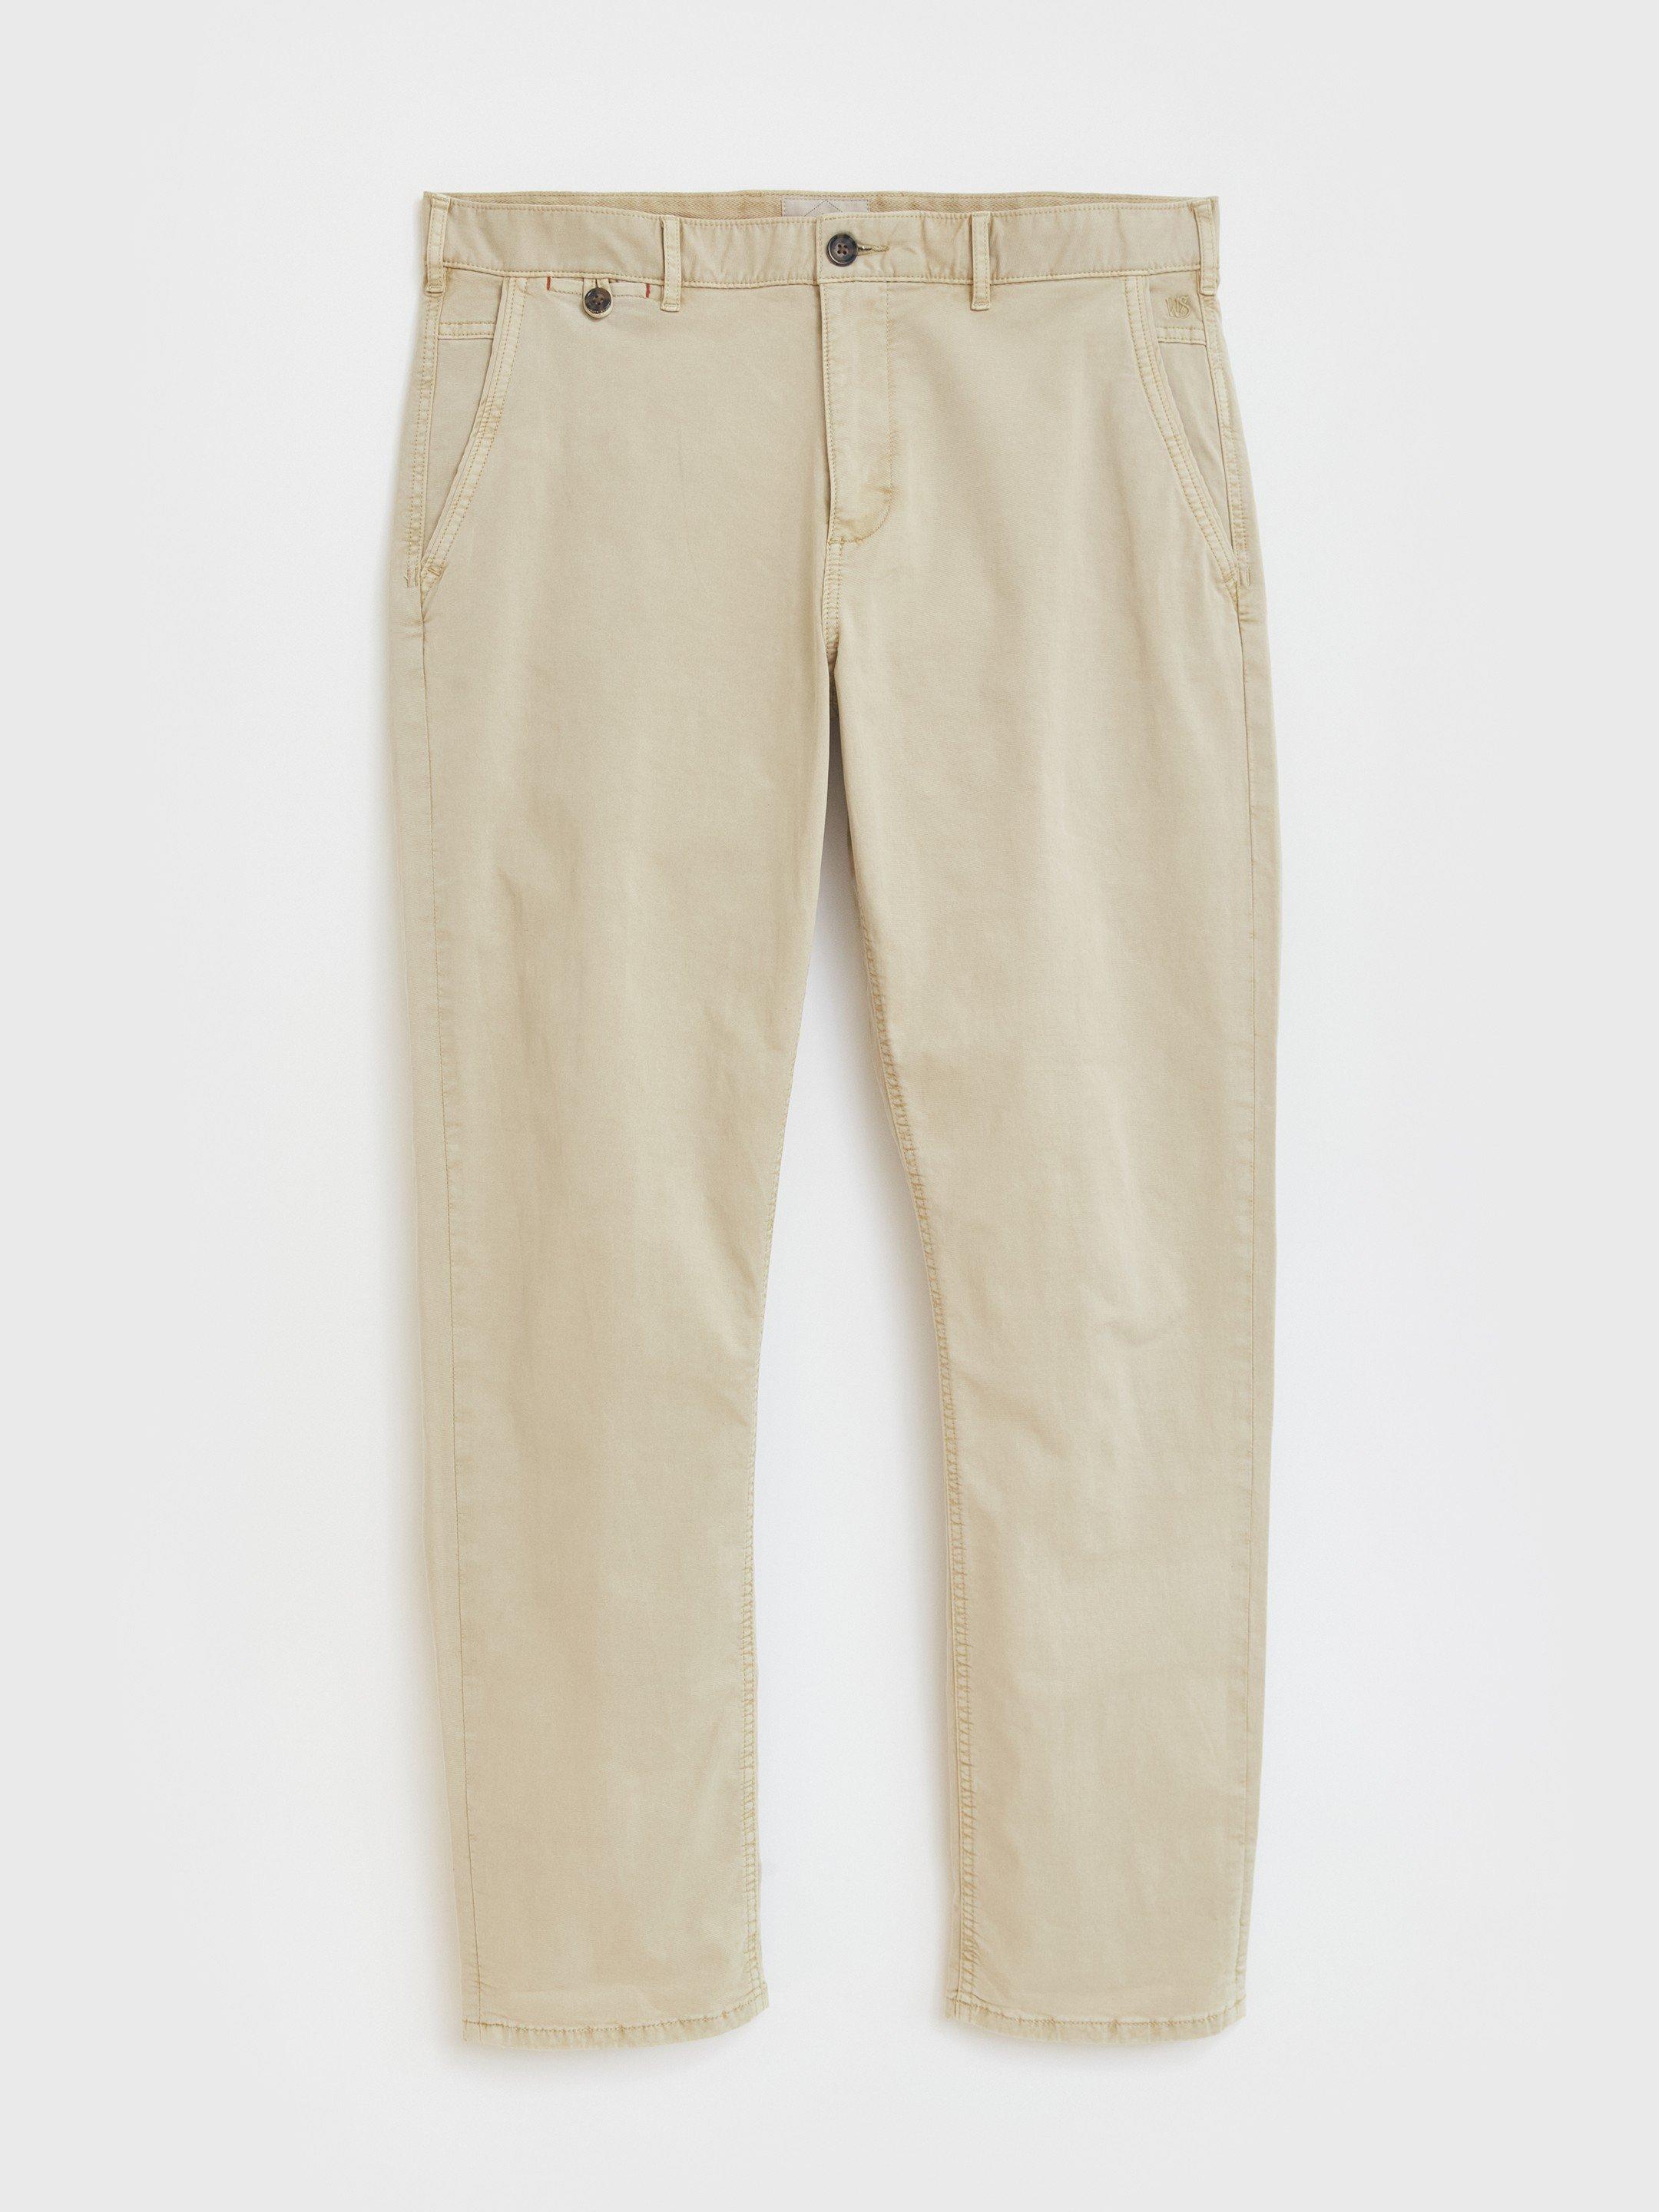 Sutton Organic Chino Trouser in NATURAL PLAIN - FLAT FRONT